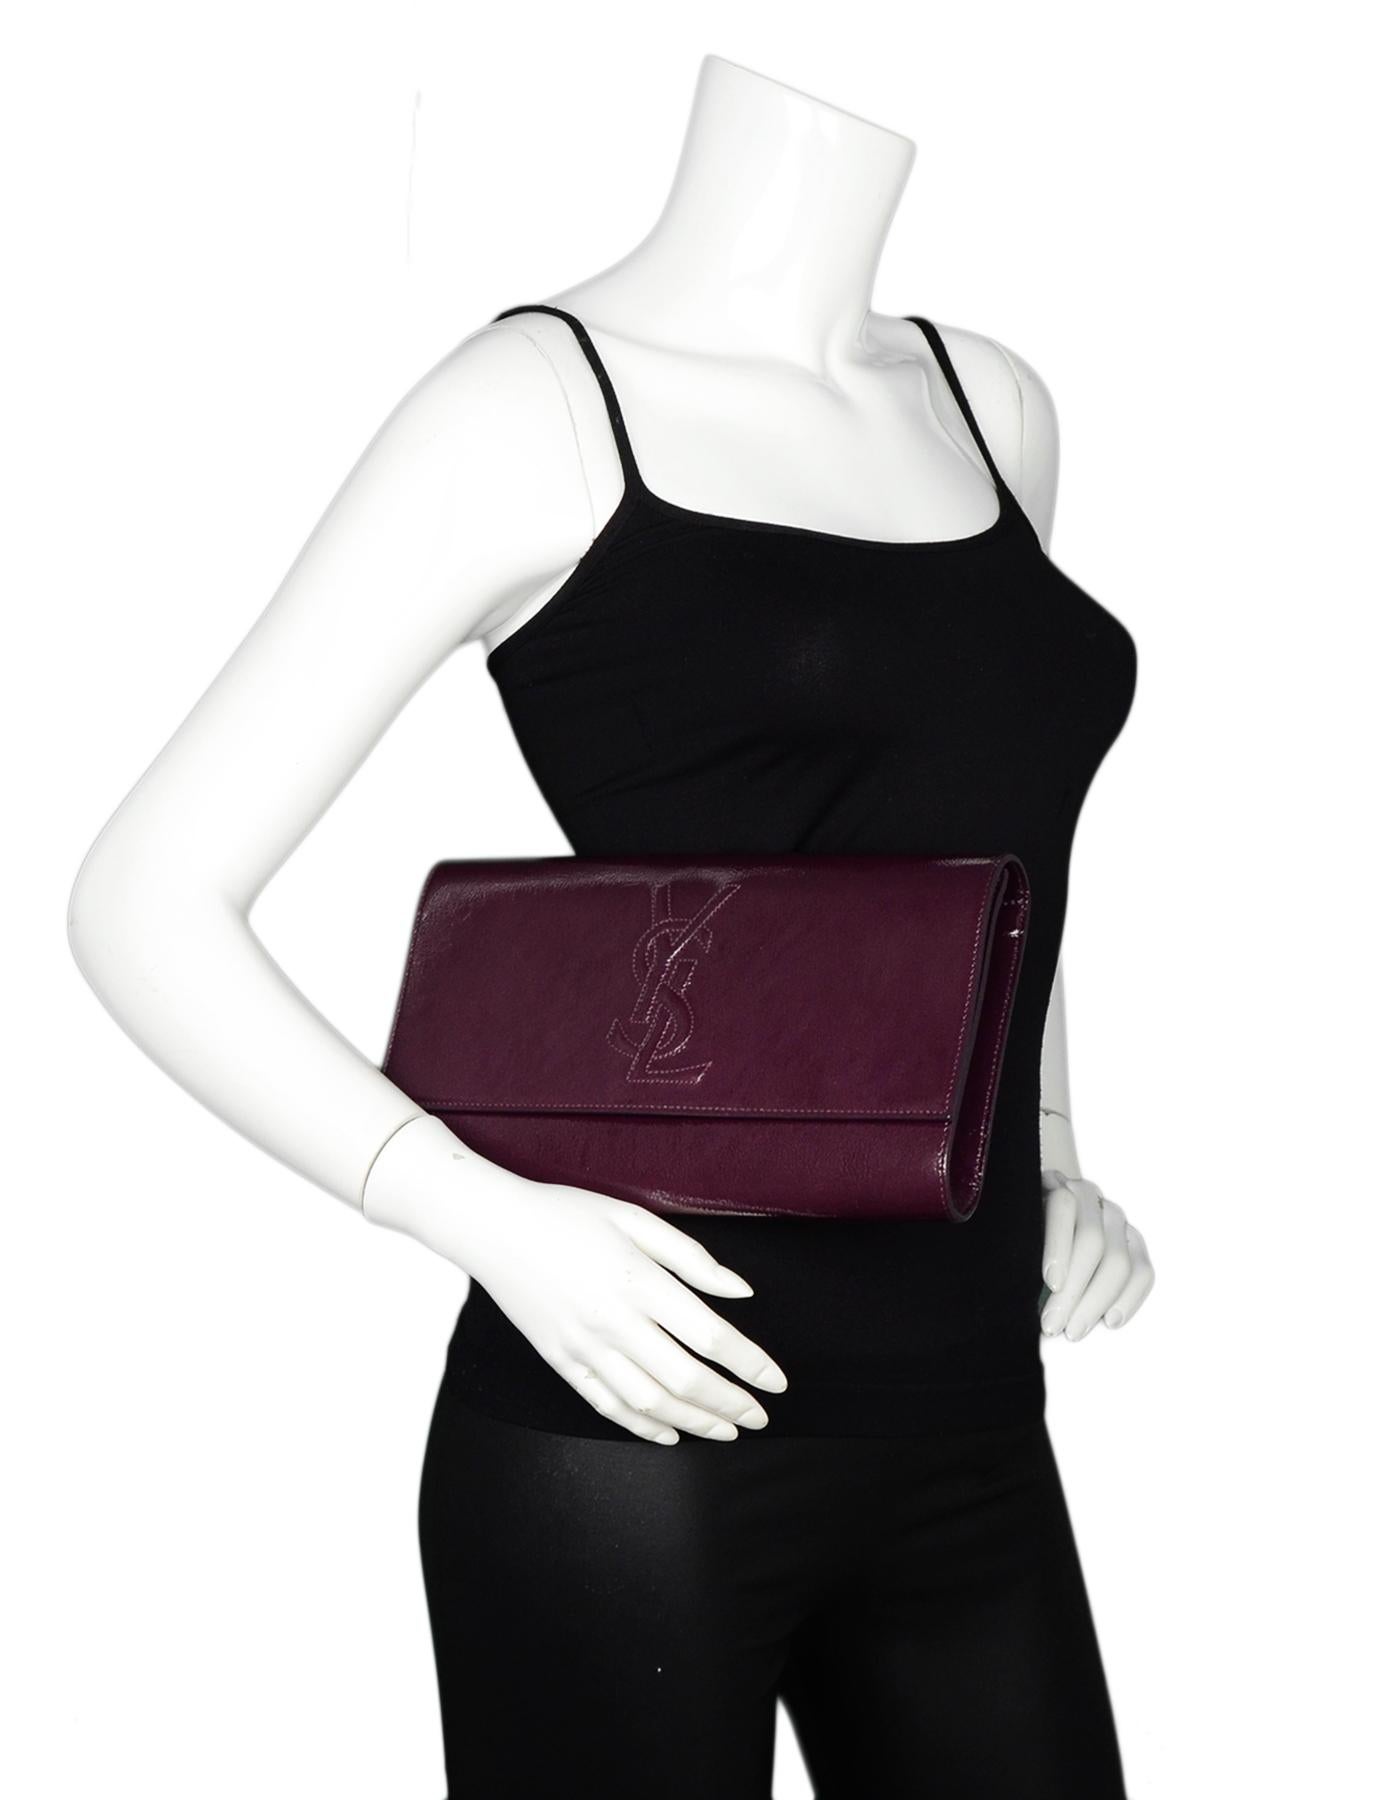 Yves Saint Laurent YSL Burgundy Belle DuJour Patent Leather Clutch 

Made In: Italy
Color: Burgundy 
Hardware: Goldtone
Materials: Patent leather
Lining: Burgundy satin
Closure/Opening: Flap top with magnetic closure
Exterior Pockets: None
Interior